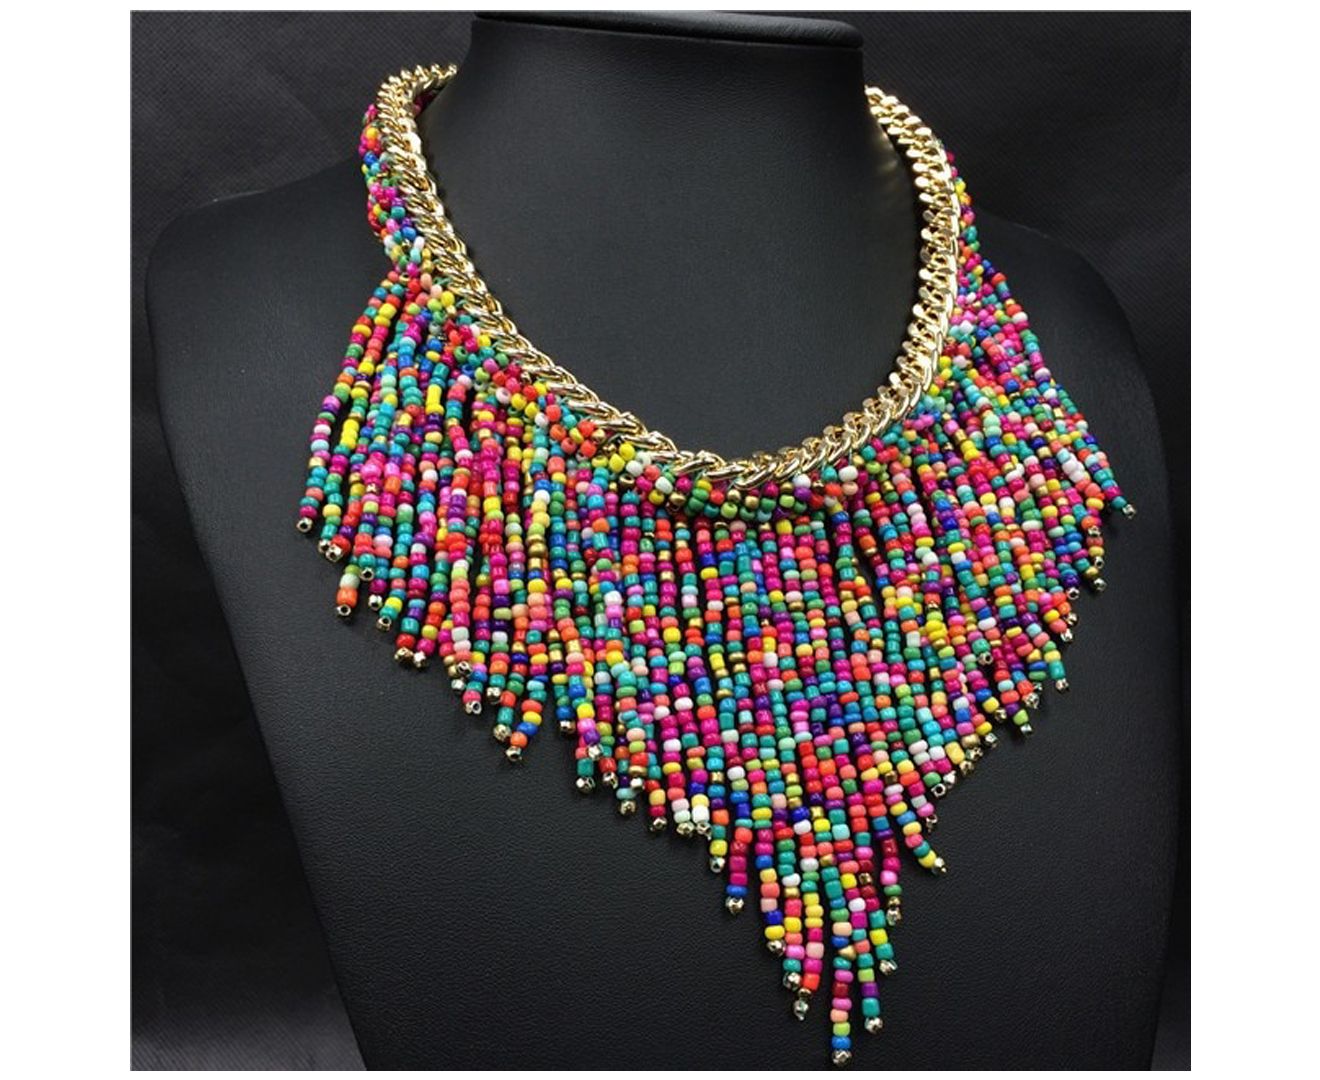 Handwoven Collier Long Tassel Beads Multicolor Choker Necklace